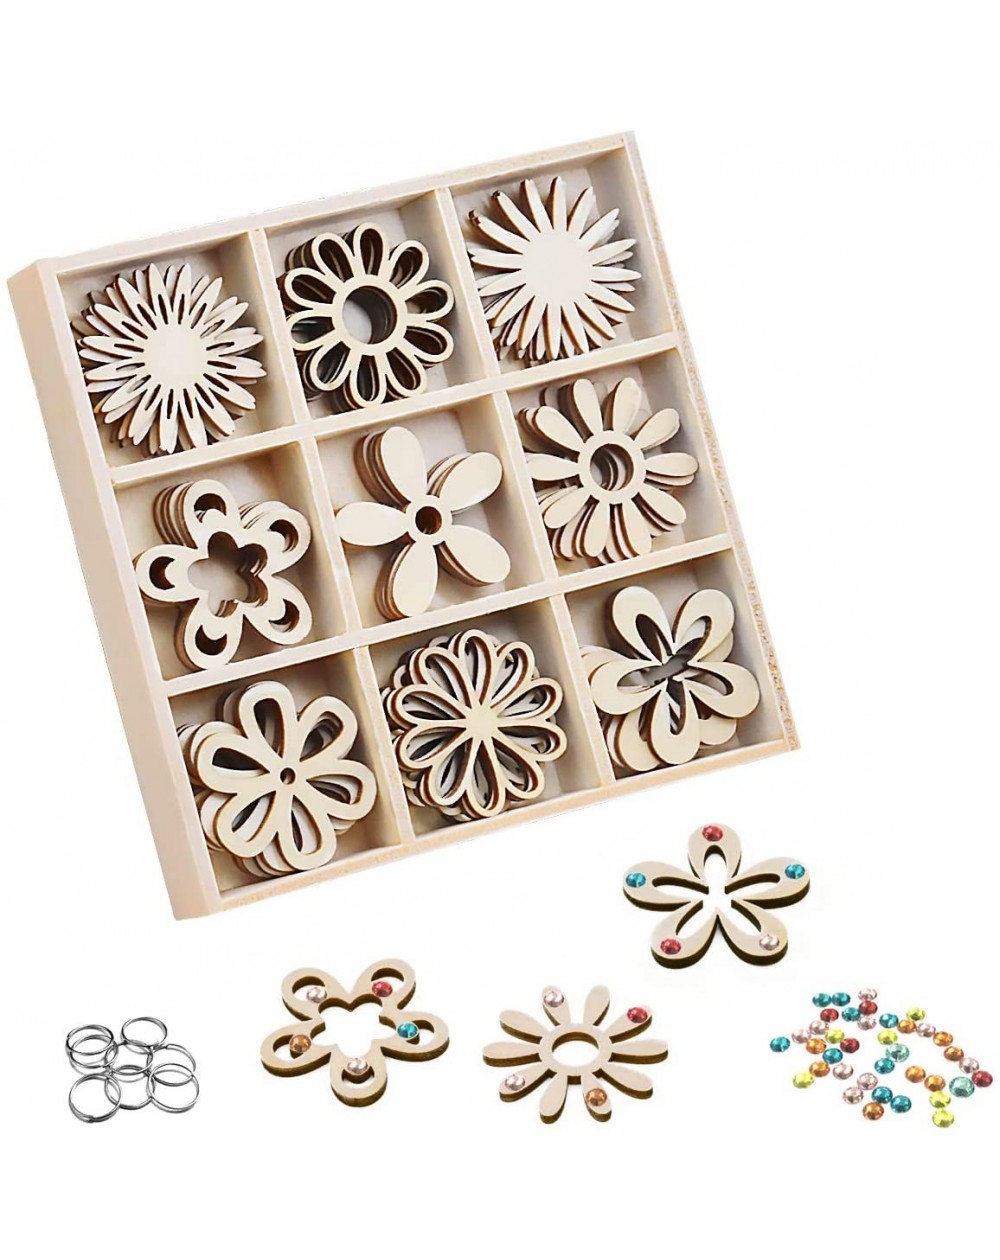 Ornaments Embellishments for Scrapbooking- Flower Theme Wooden Crafts Sets for Kids Blanks Embellishments Sets Laser Cuts Woo...